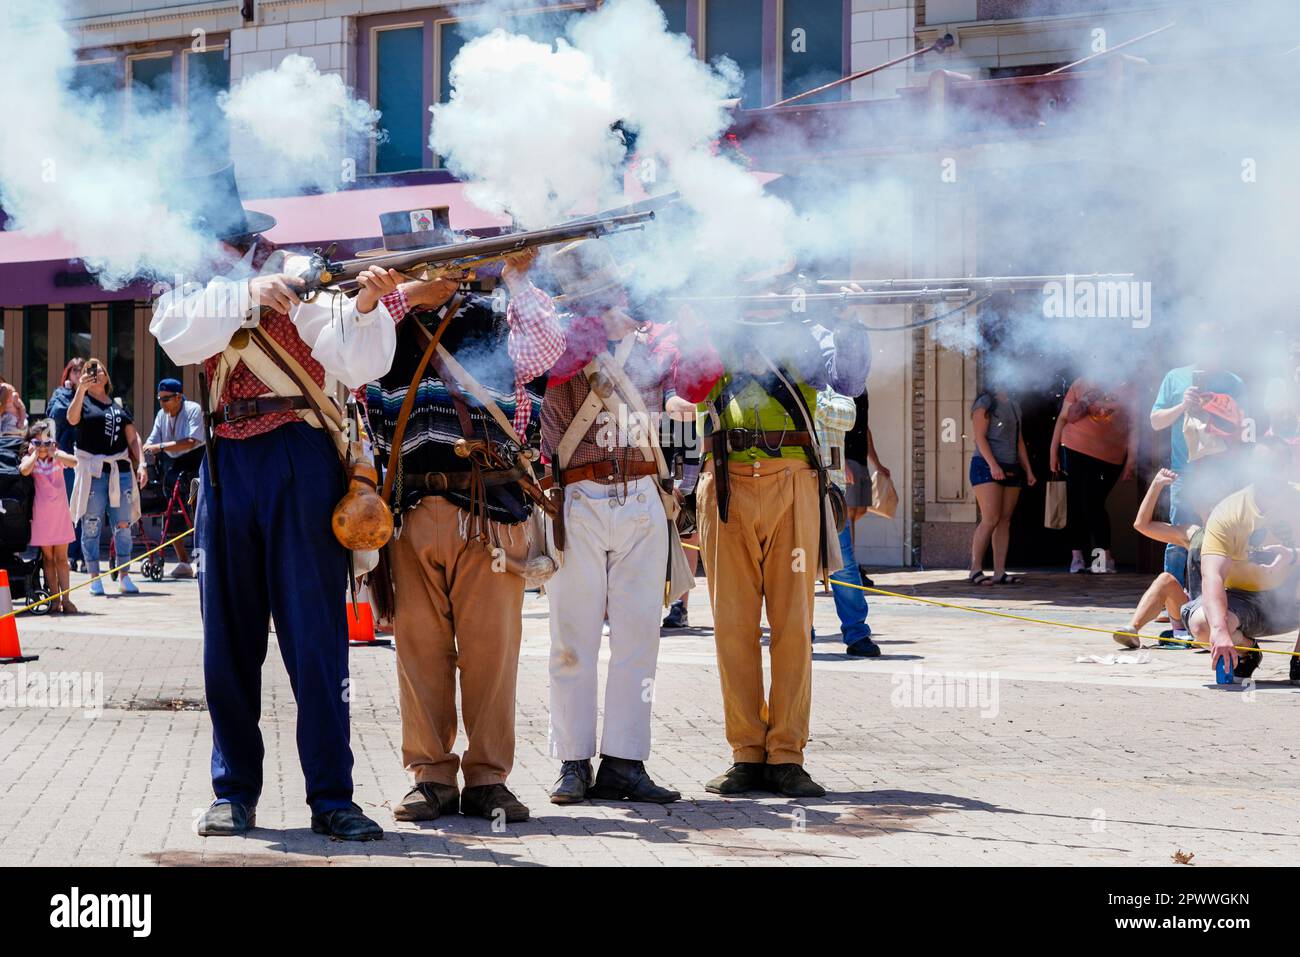 Musket firing re-enactment in front of The Alamo, Austin, Texas. Stock Photo